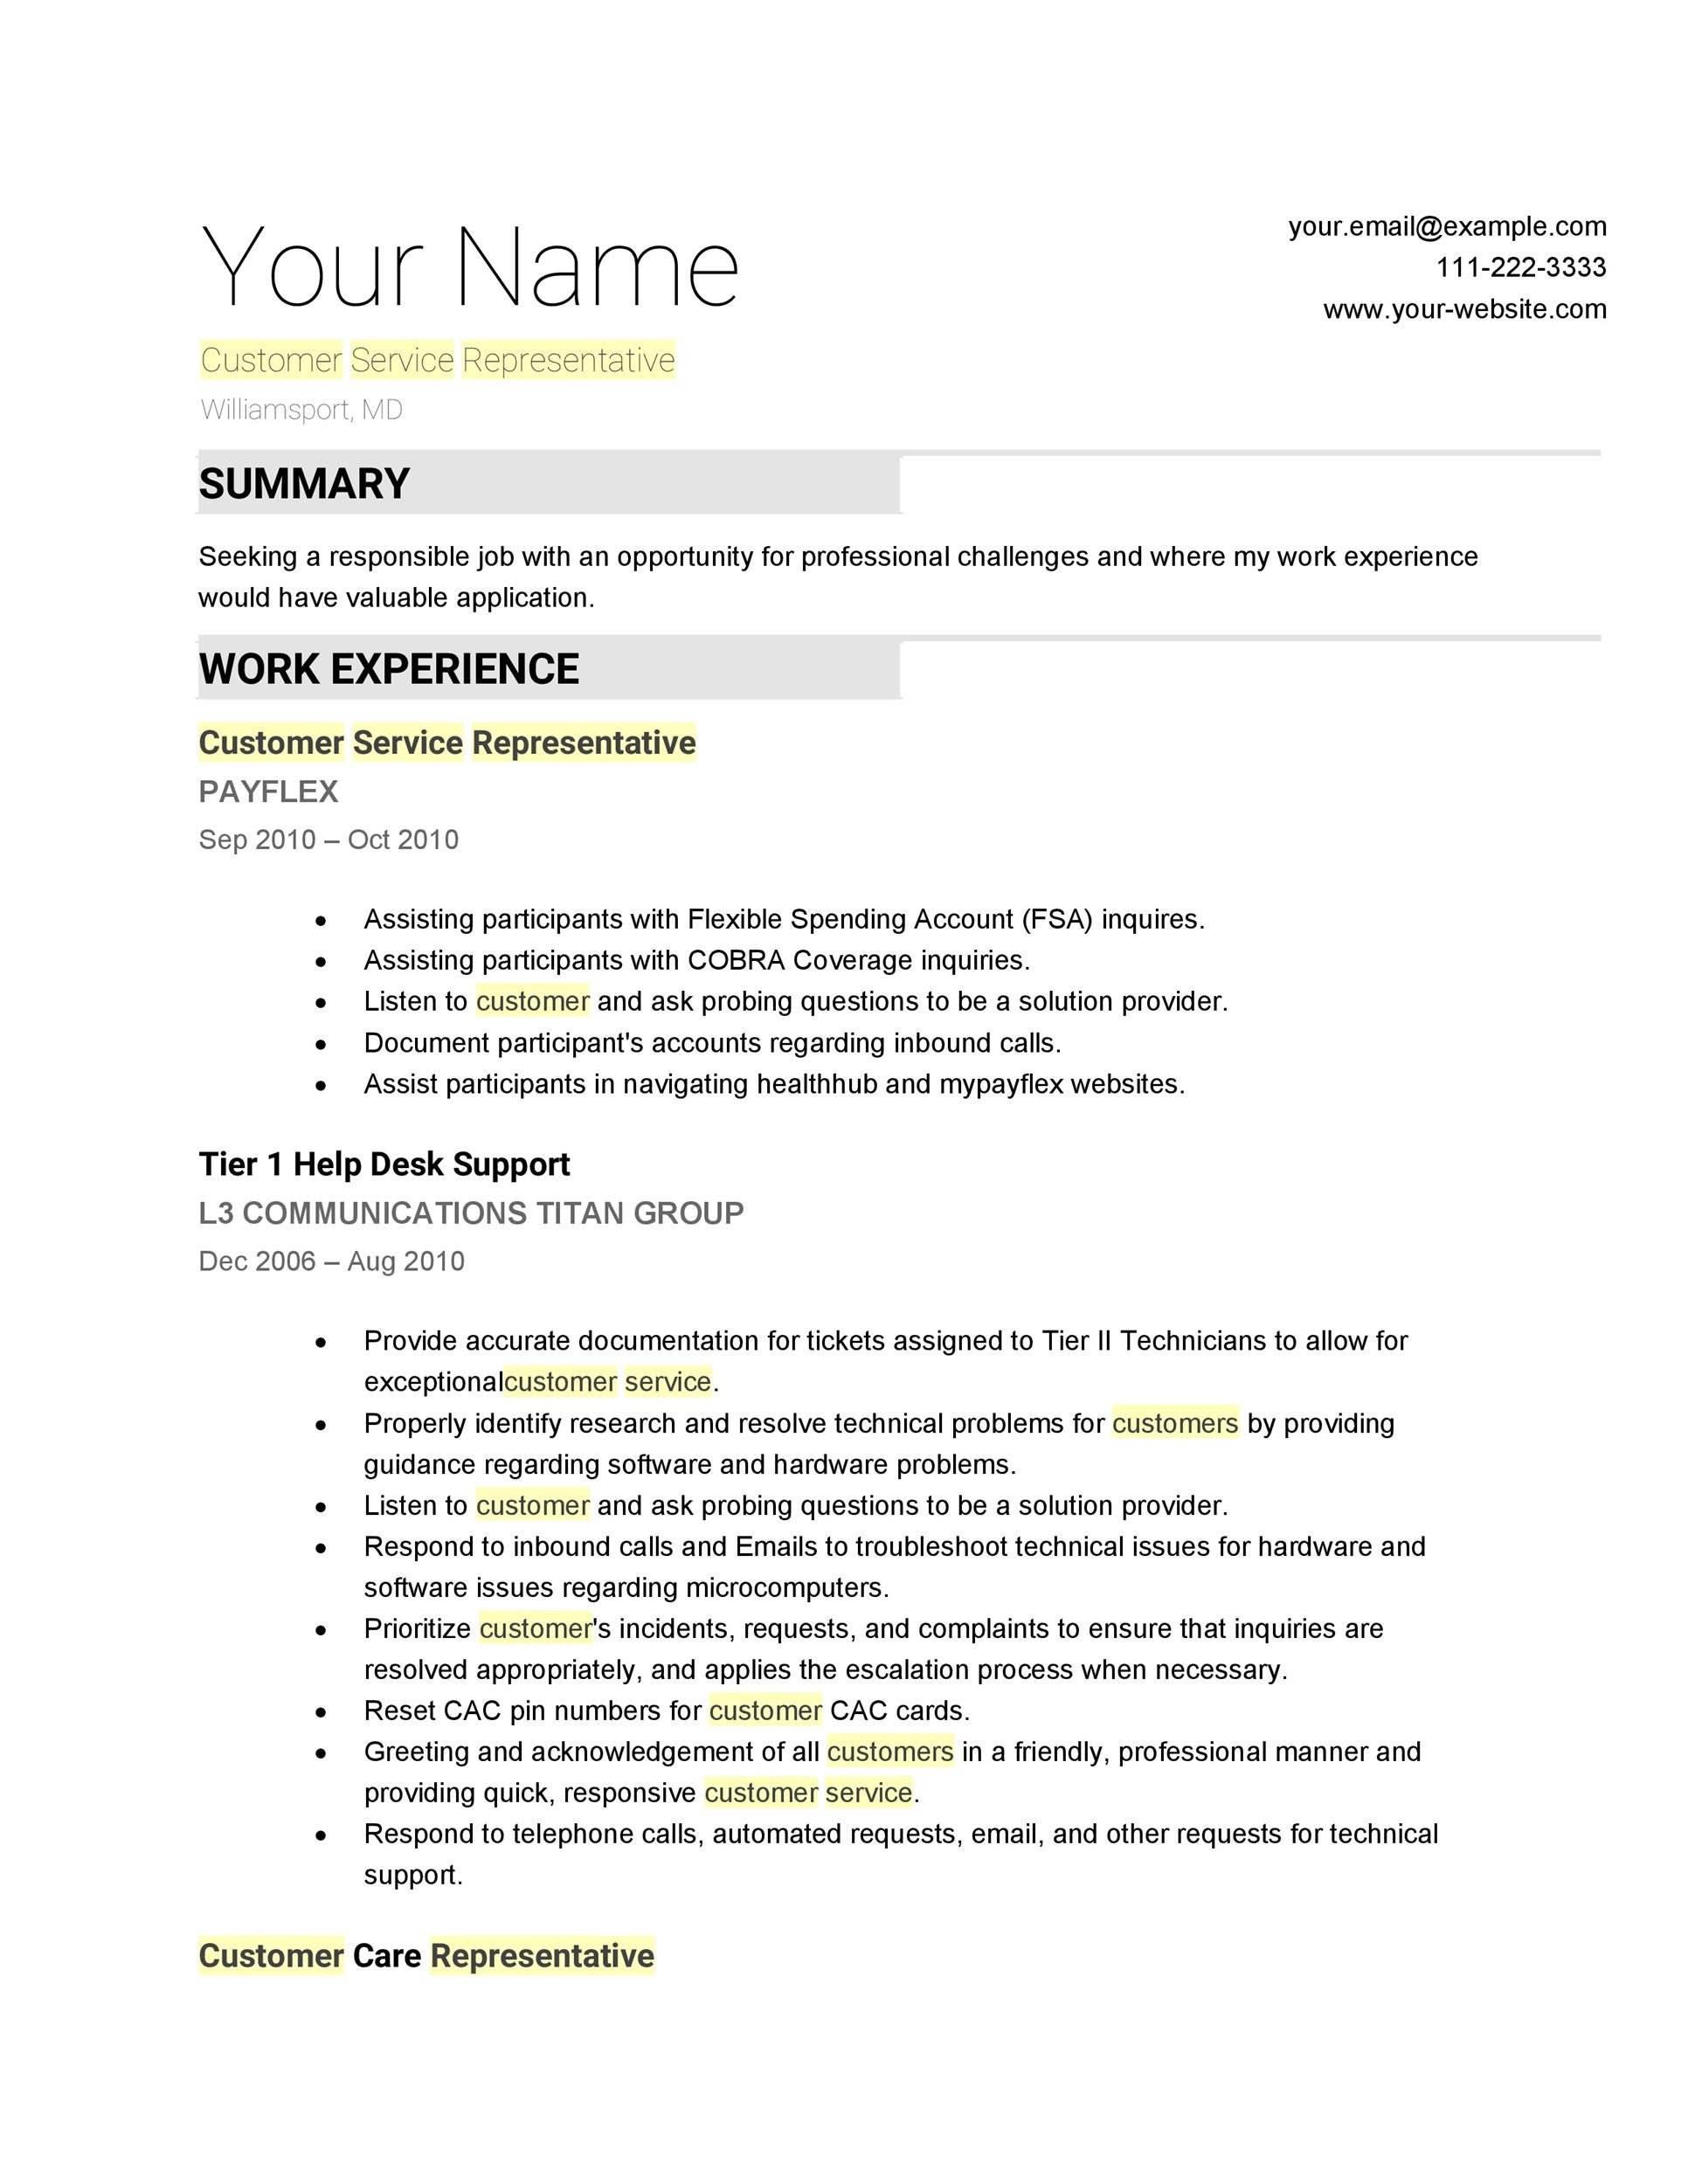 Professional Summary Resume Sample for Customer Service 30 Customer Service Resume Examples Templatelab